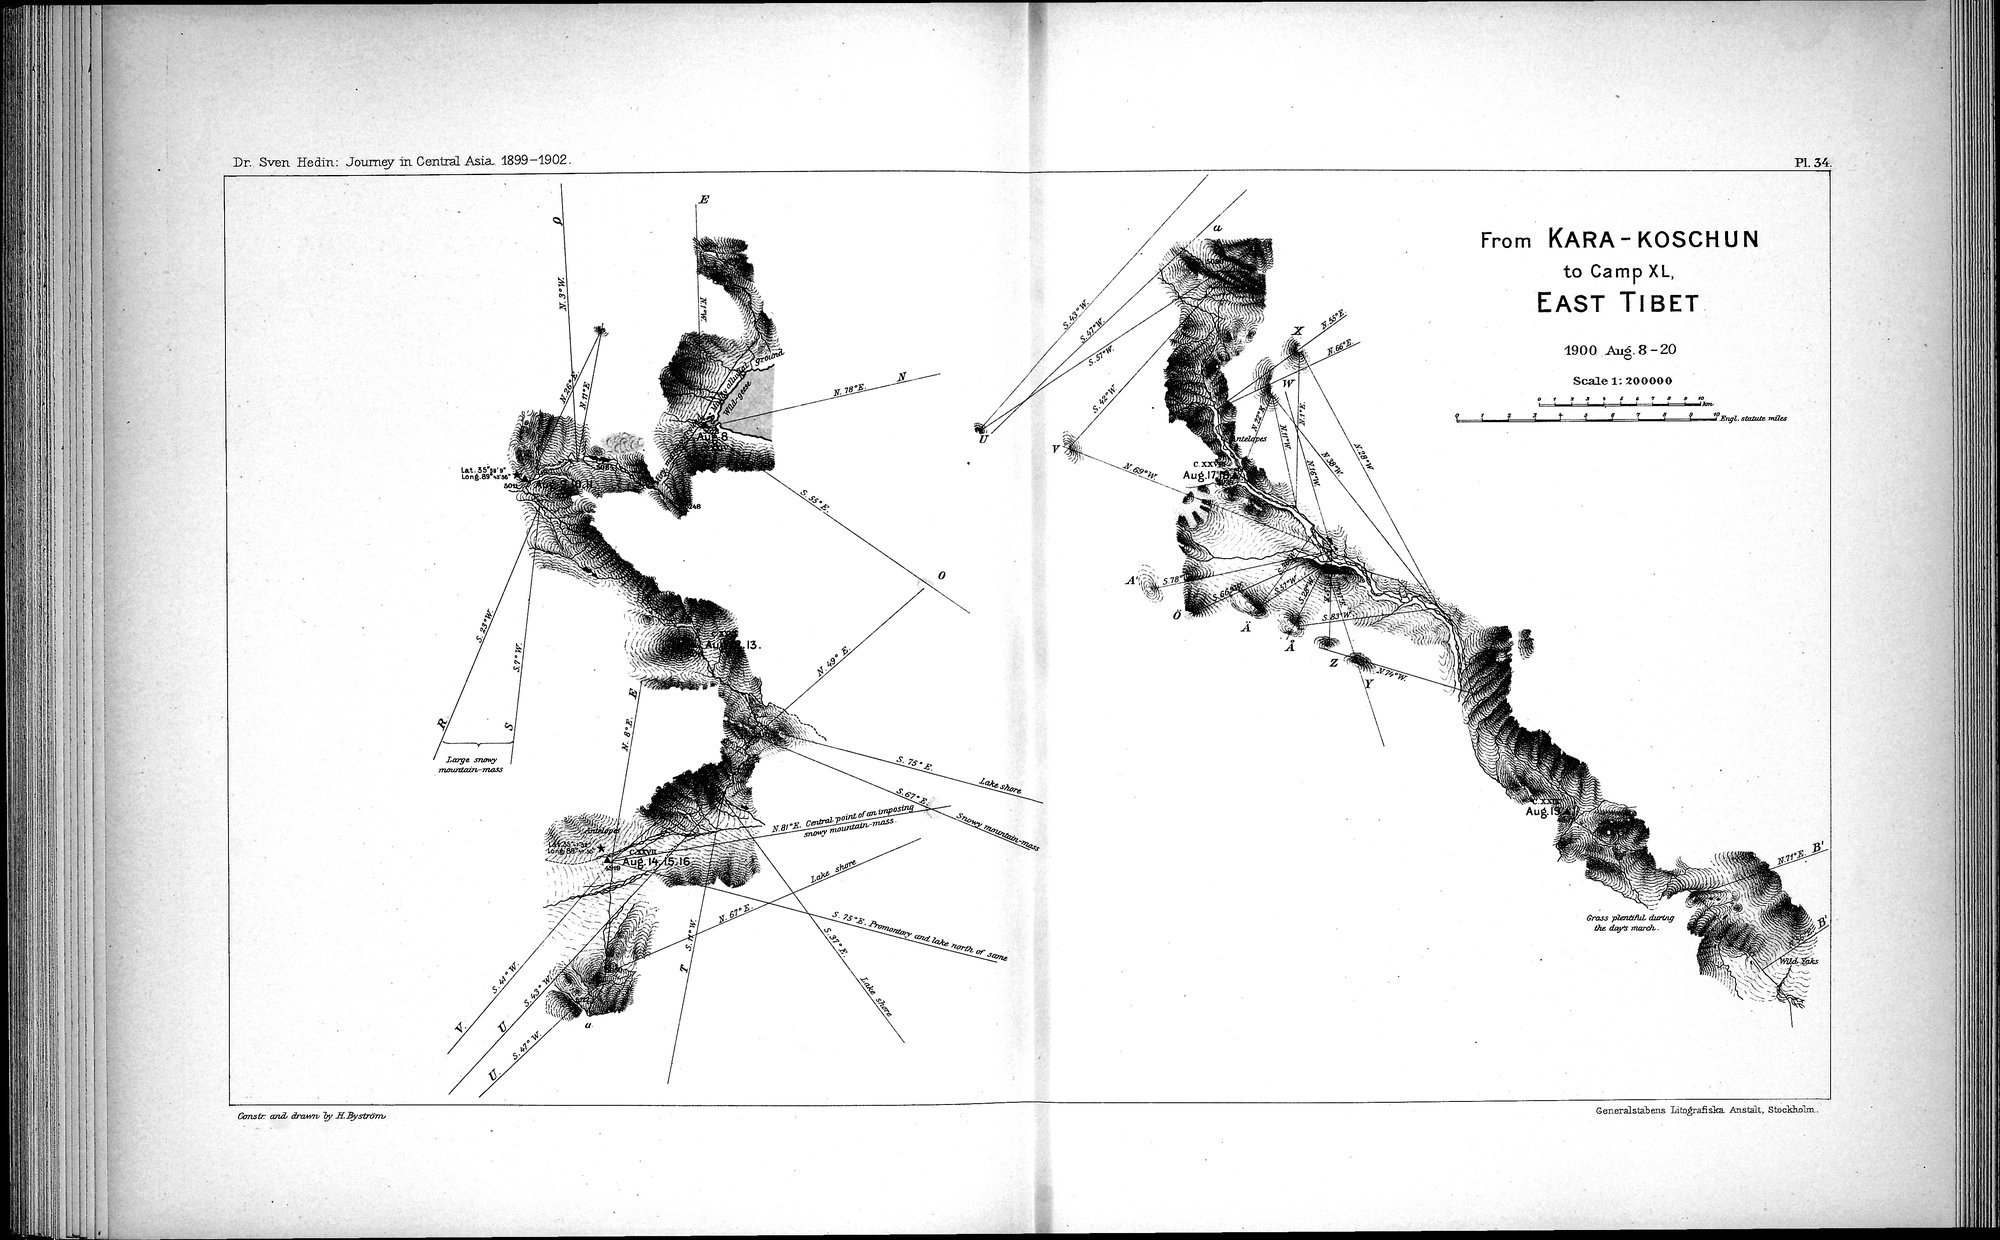 Scientific Results of a Journey in Central Asia, 1899-1902 : vol.7 / 150 ページ（白黒高解像度画像）